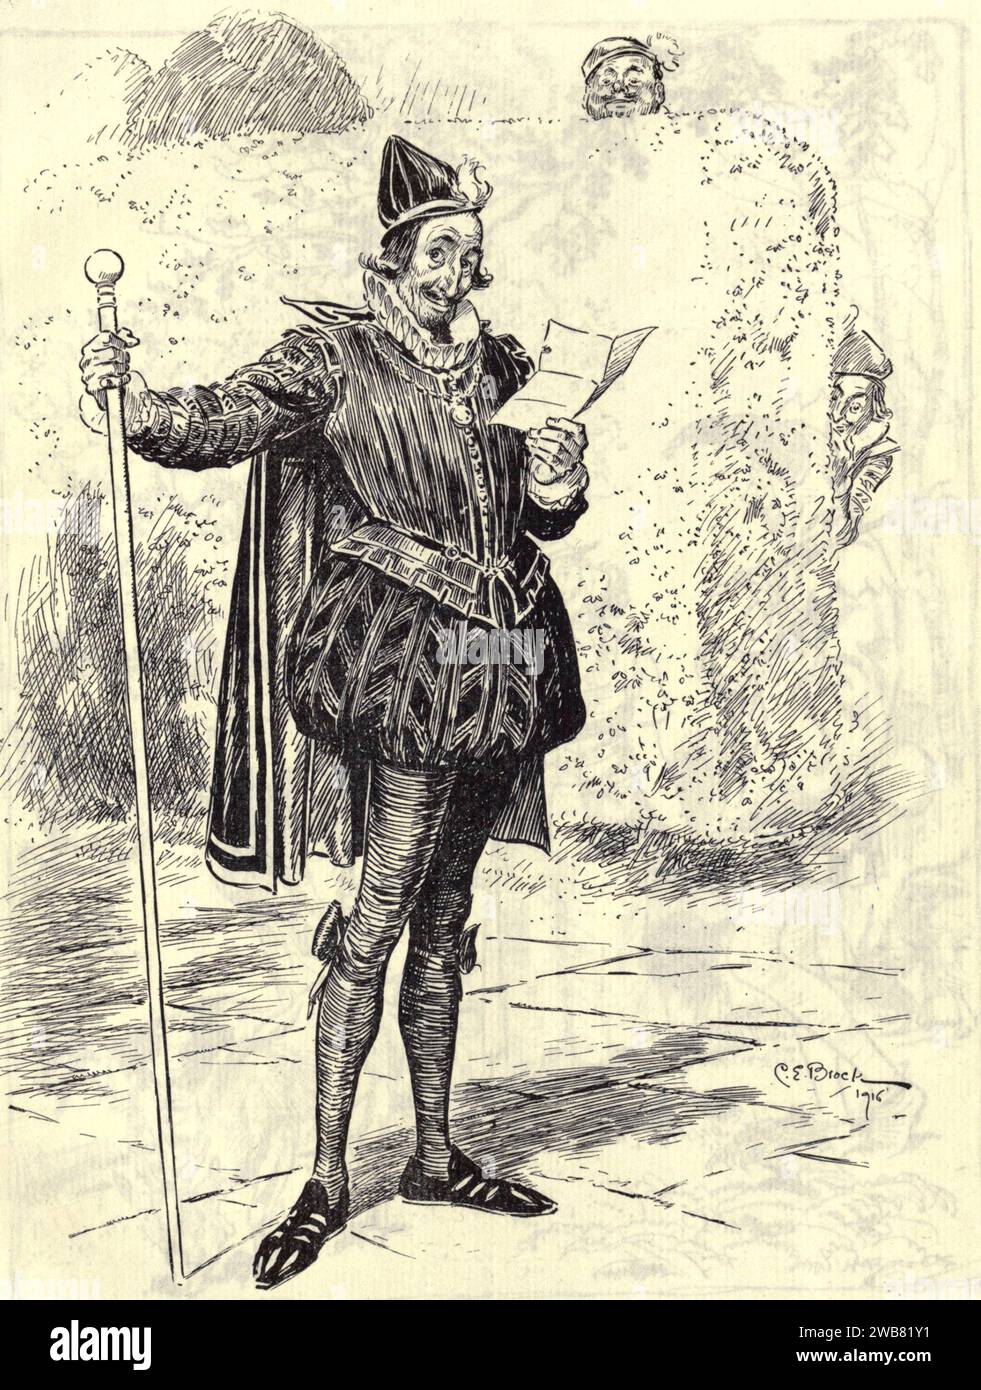 Malvolio Jove, I thank thee: I will smile : I will do anything that thou wilt have me. Twelfth Night, Act III. Sc. iii. by CHARLES E. BROCK, R.I. A Tribute to the genius of William Shakespeare; being the programme of a performance at Drury Lane Theatre on May 2, 1916, the tercentenary of his death; humbly offered by the players and their fellow-workers in the kindred arts of music & painting MACMILLAN AND CO., LIMITED ST. MARTIN'S STREET, LONDON 1916 Stock Photo